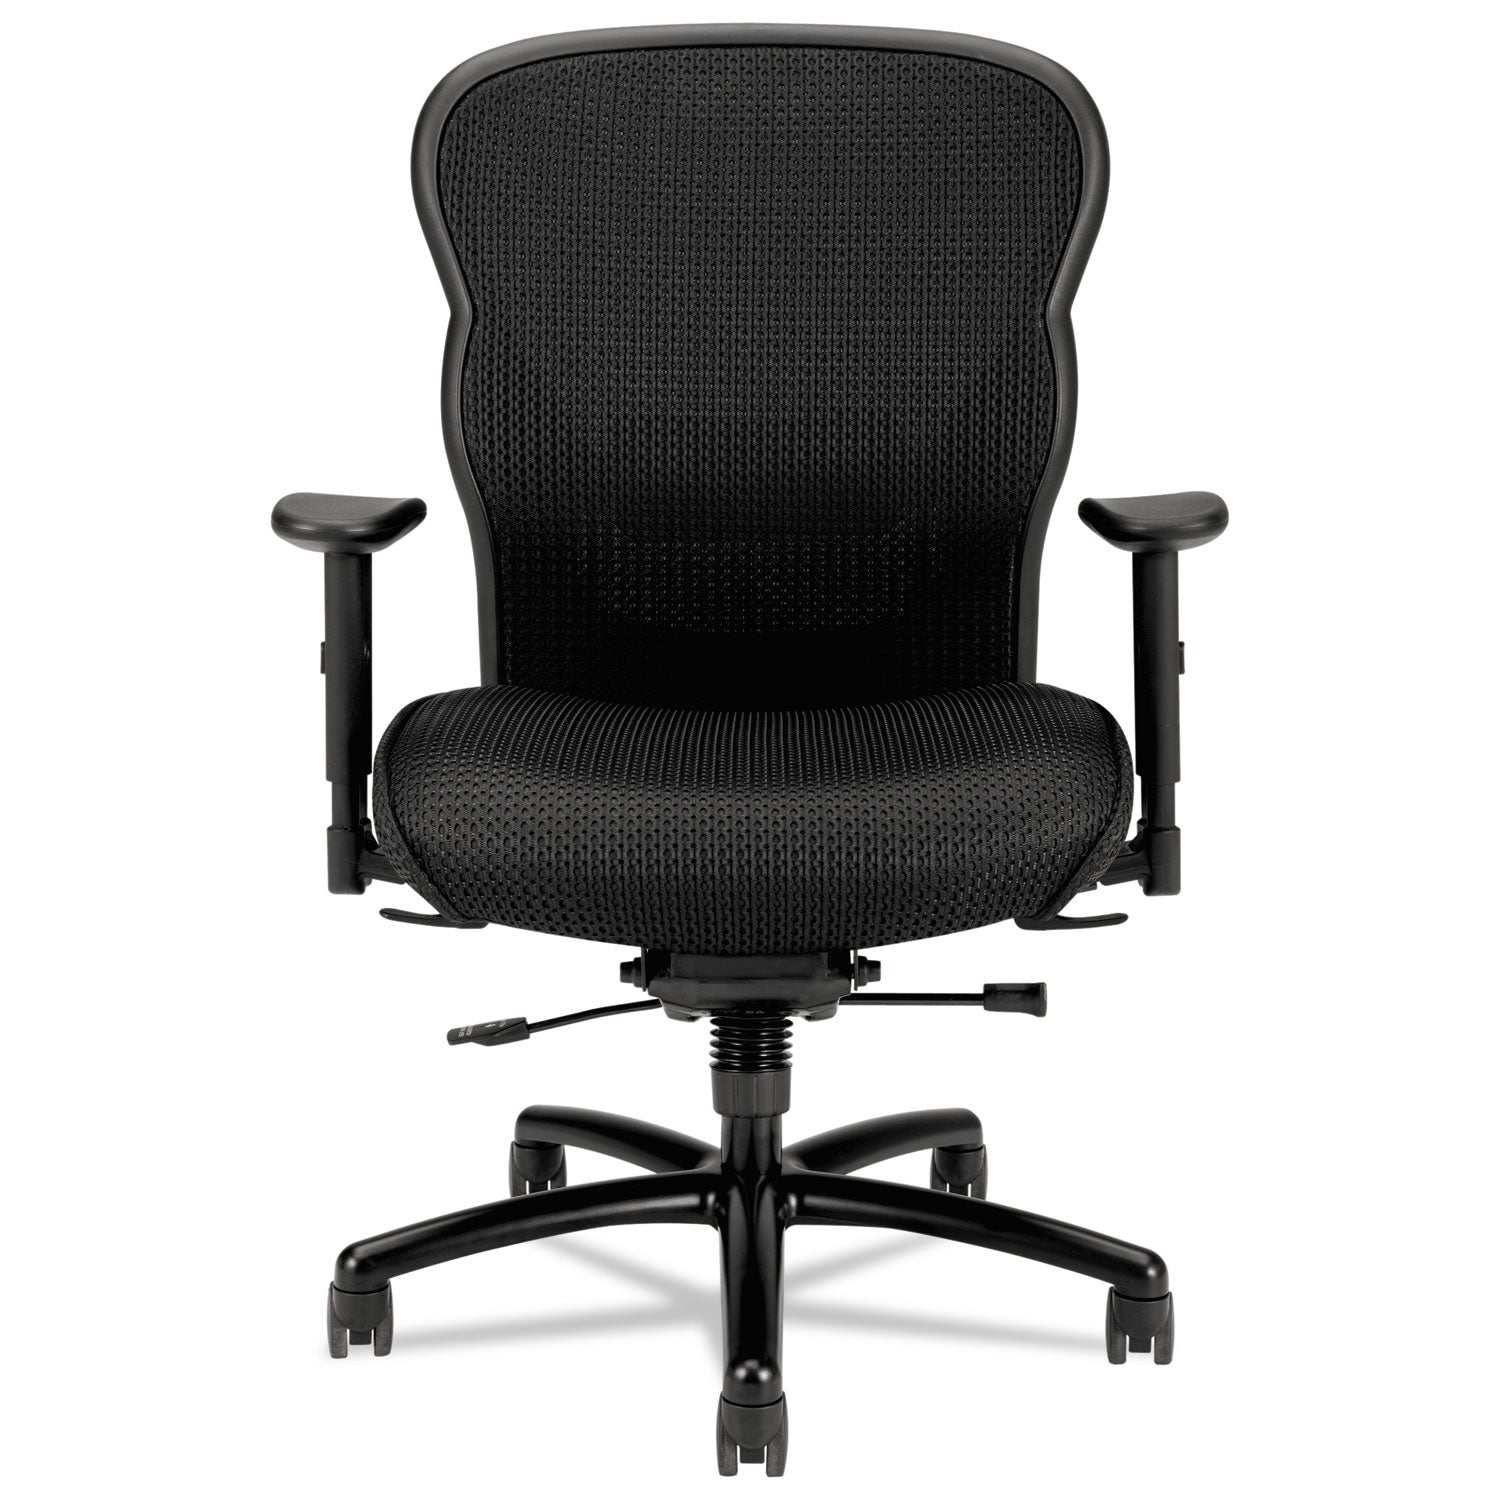 Wave Mesh Big and Tall Chair, Supports Up to 450 lb, 19.25" to 22.25" Seat Height, Black - 